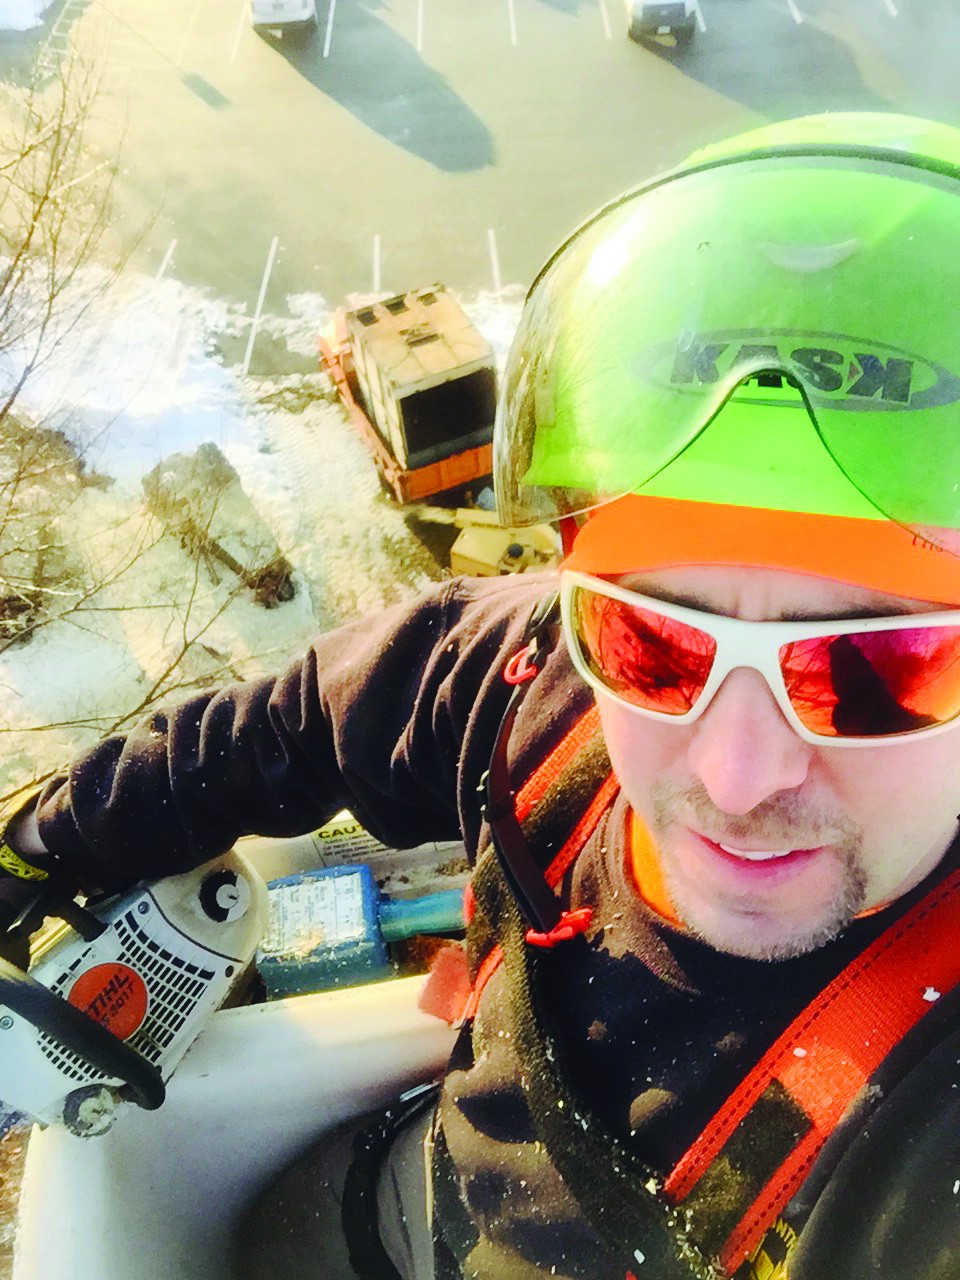 Phil DiLorenzo took this selfie in his personal protective equipment.